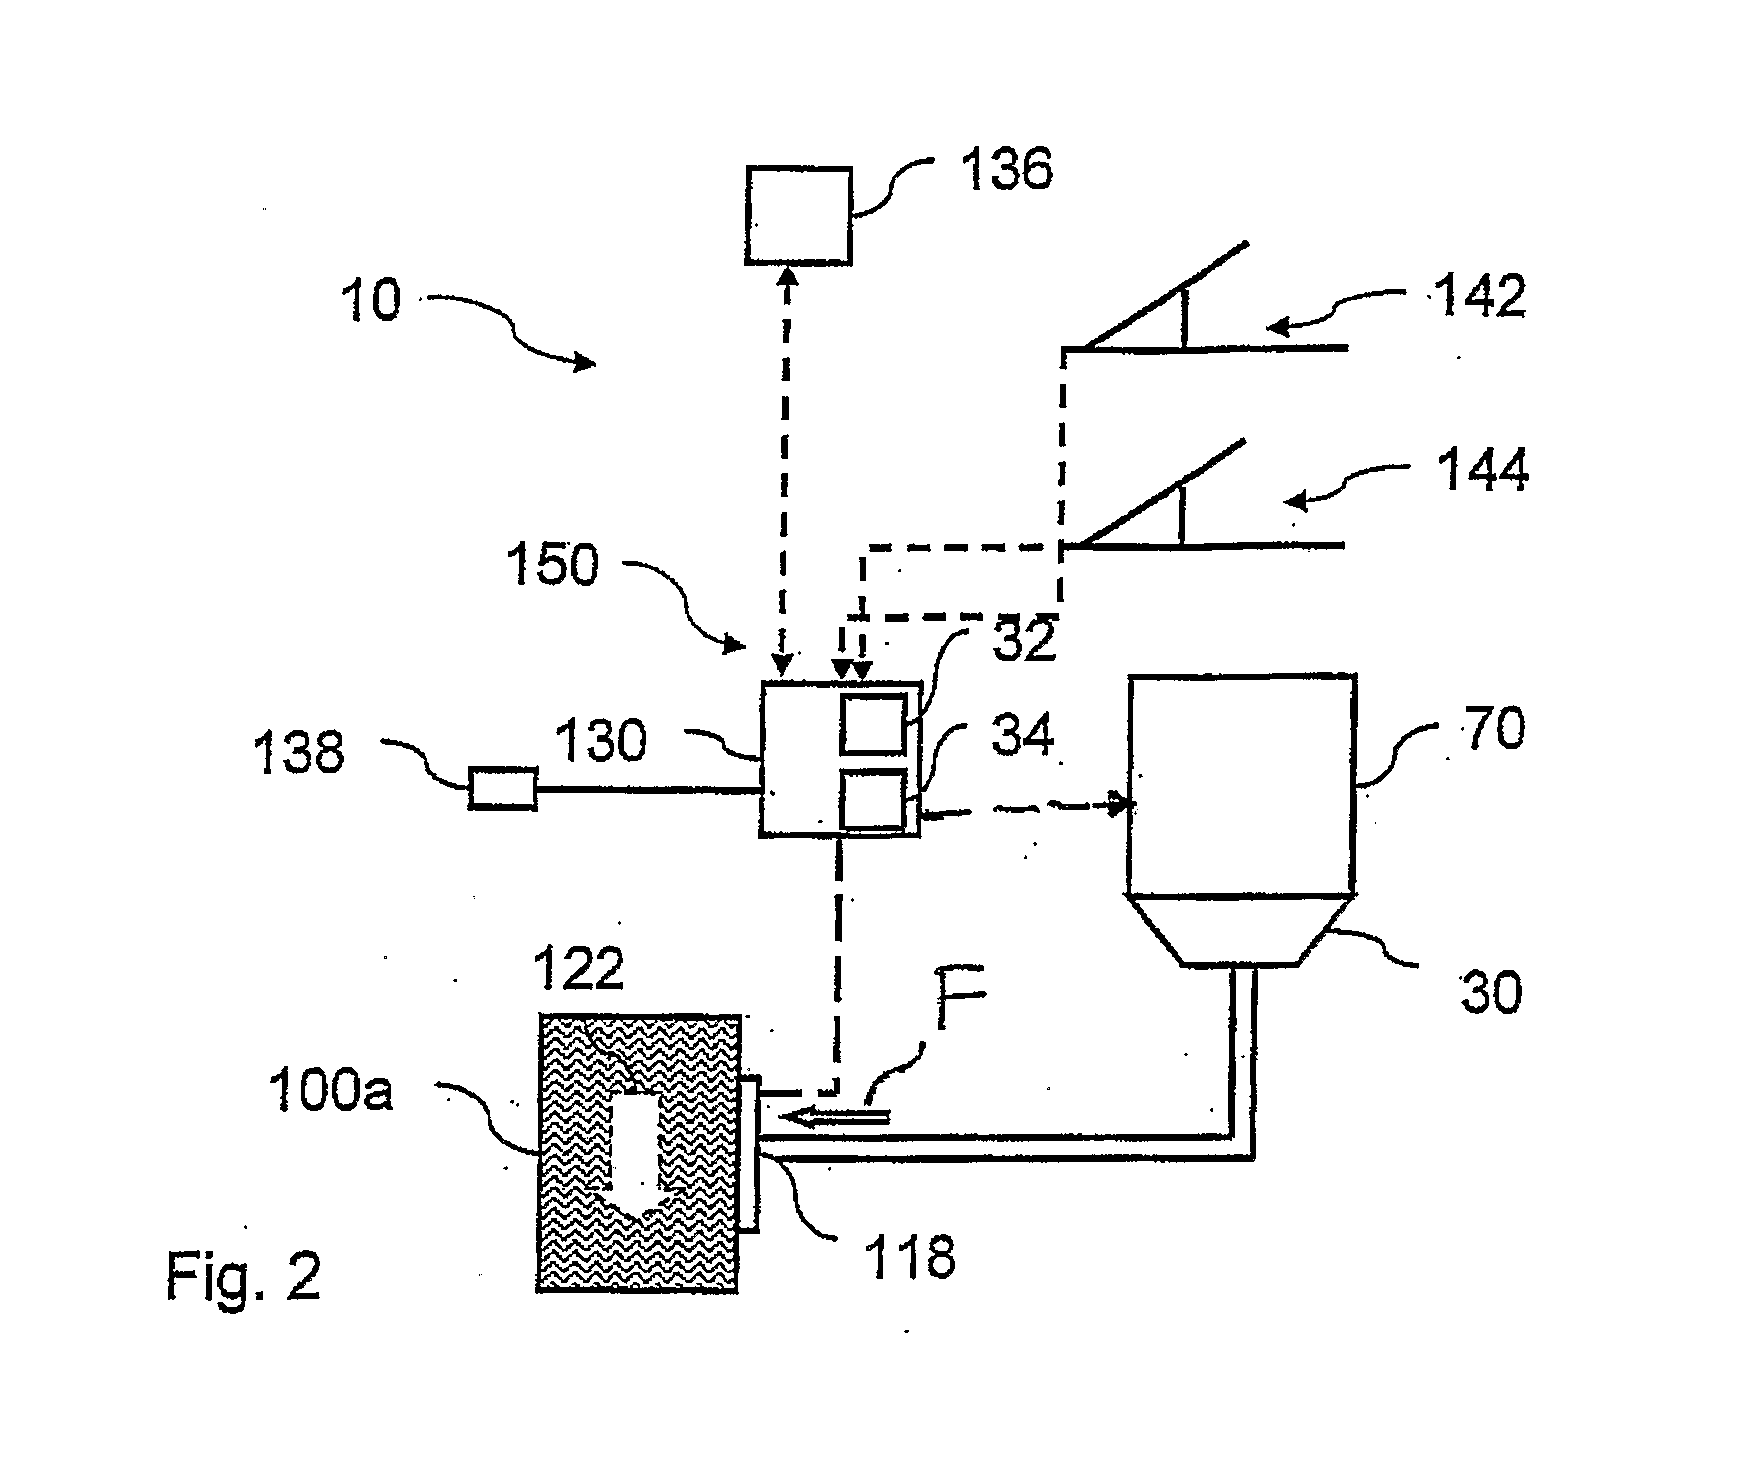 Method and a system for testing the braking capacity of one or more brake elements of a vehicle